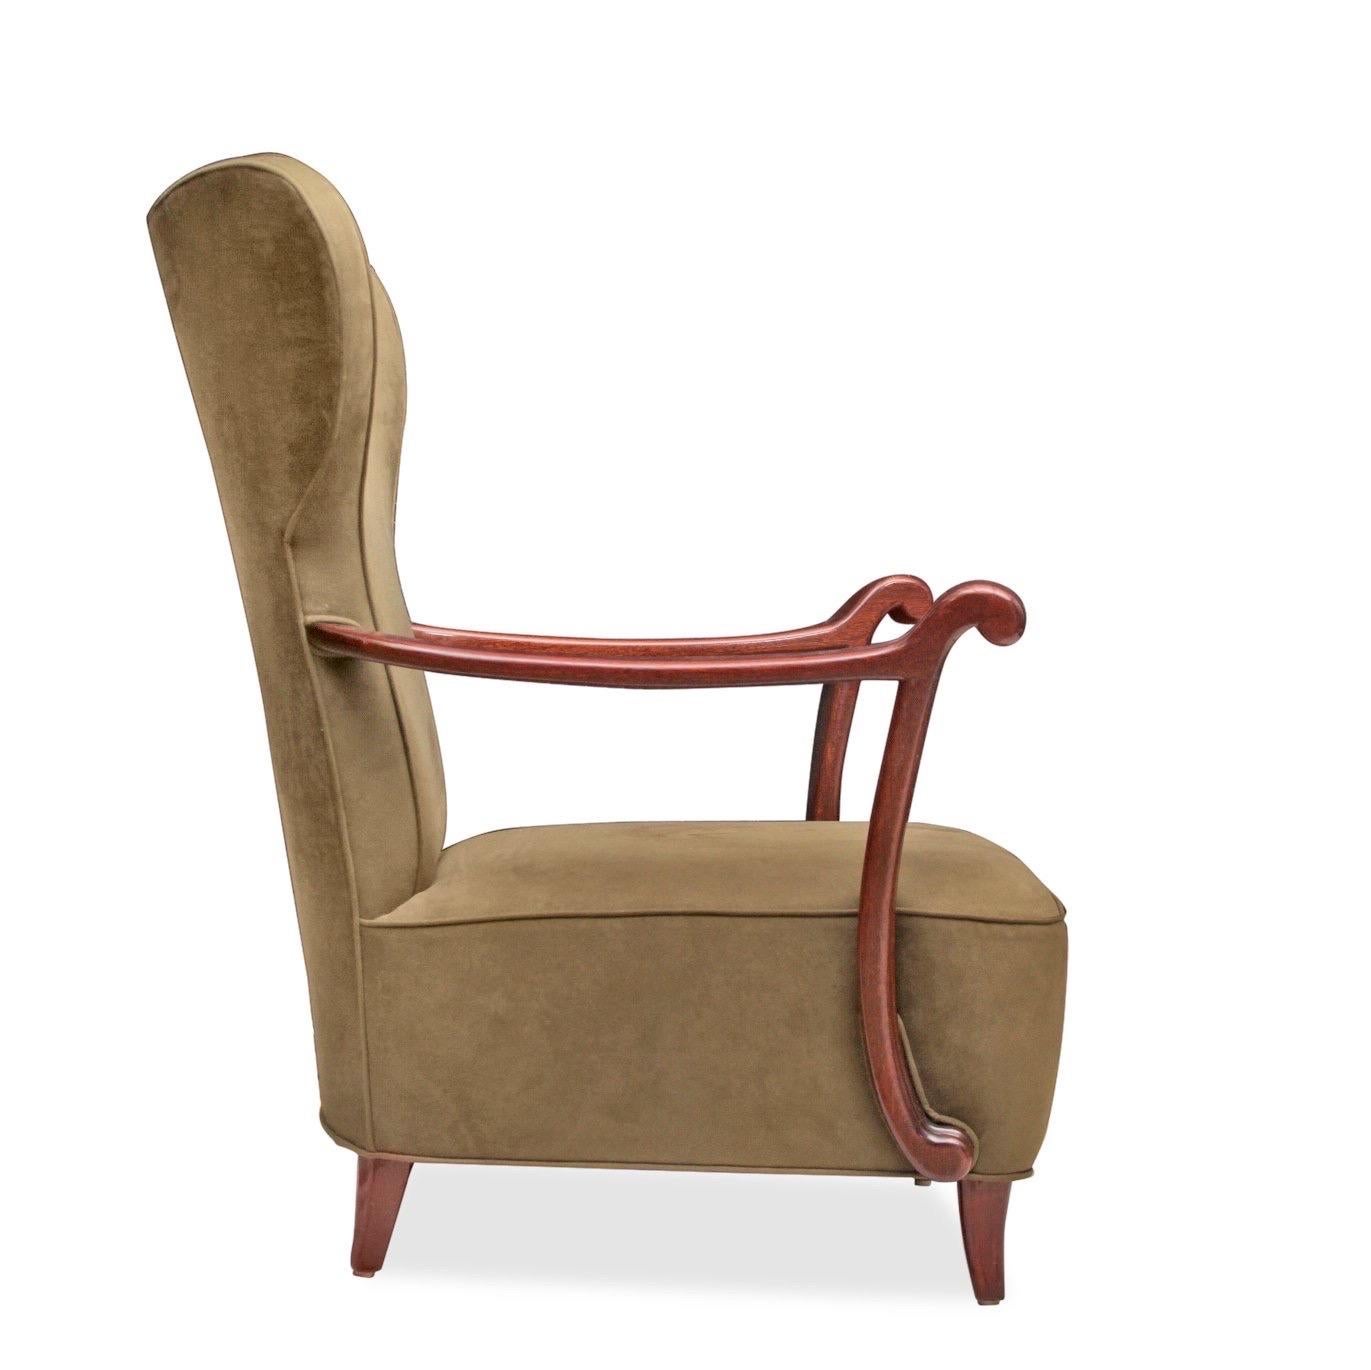 Mid-20th Century Vintage Italian Midcentury Wingback Chairs, a pair For Sale